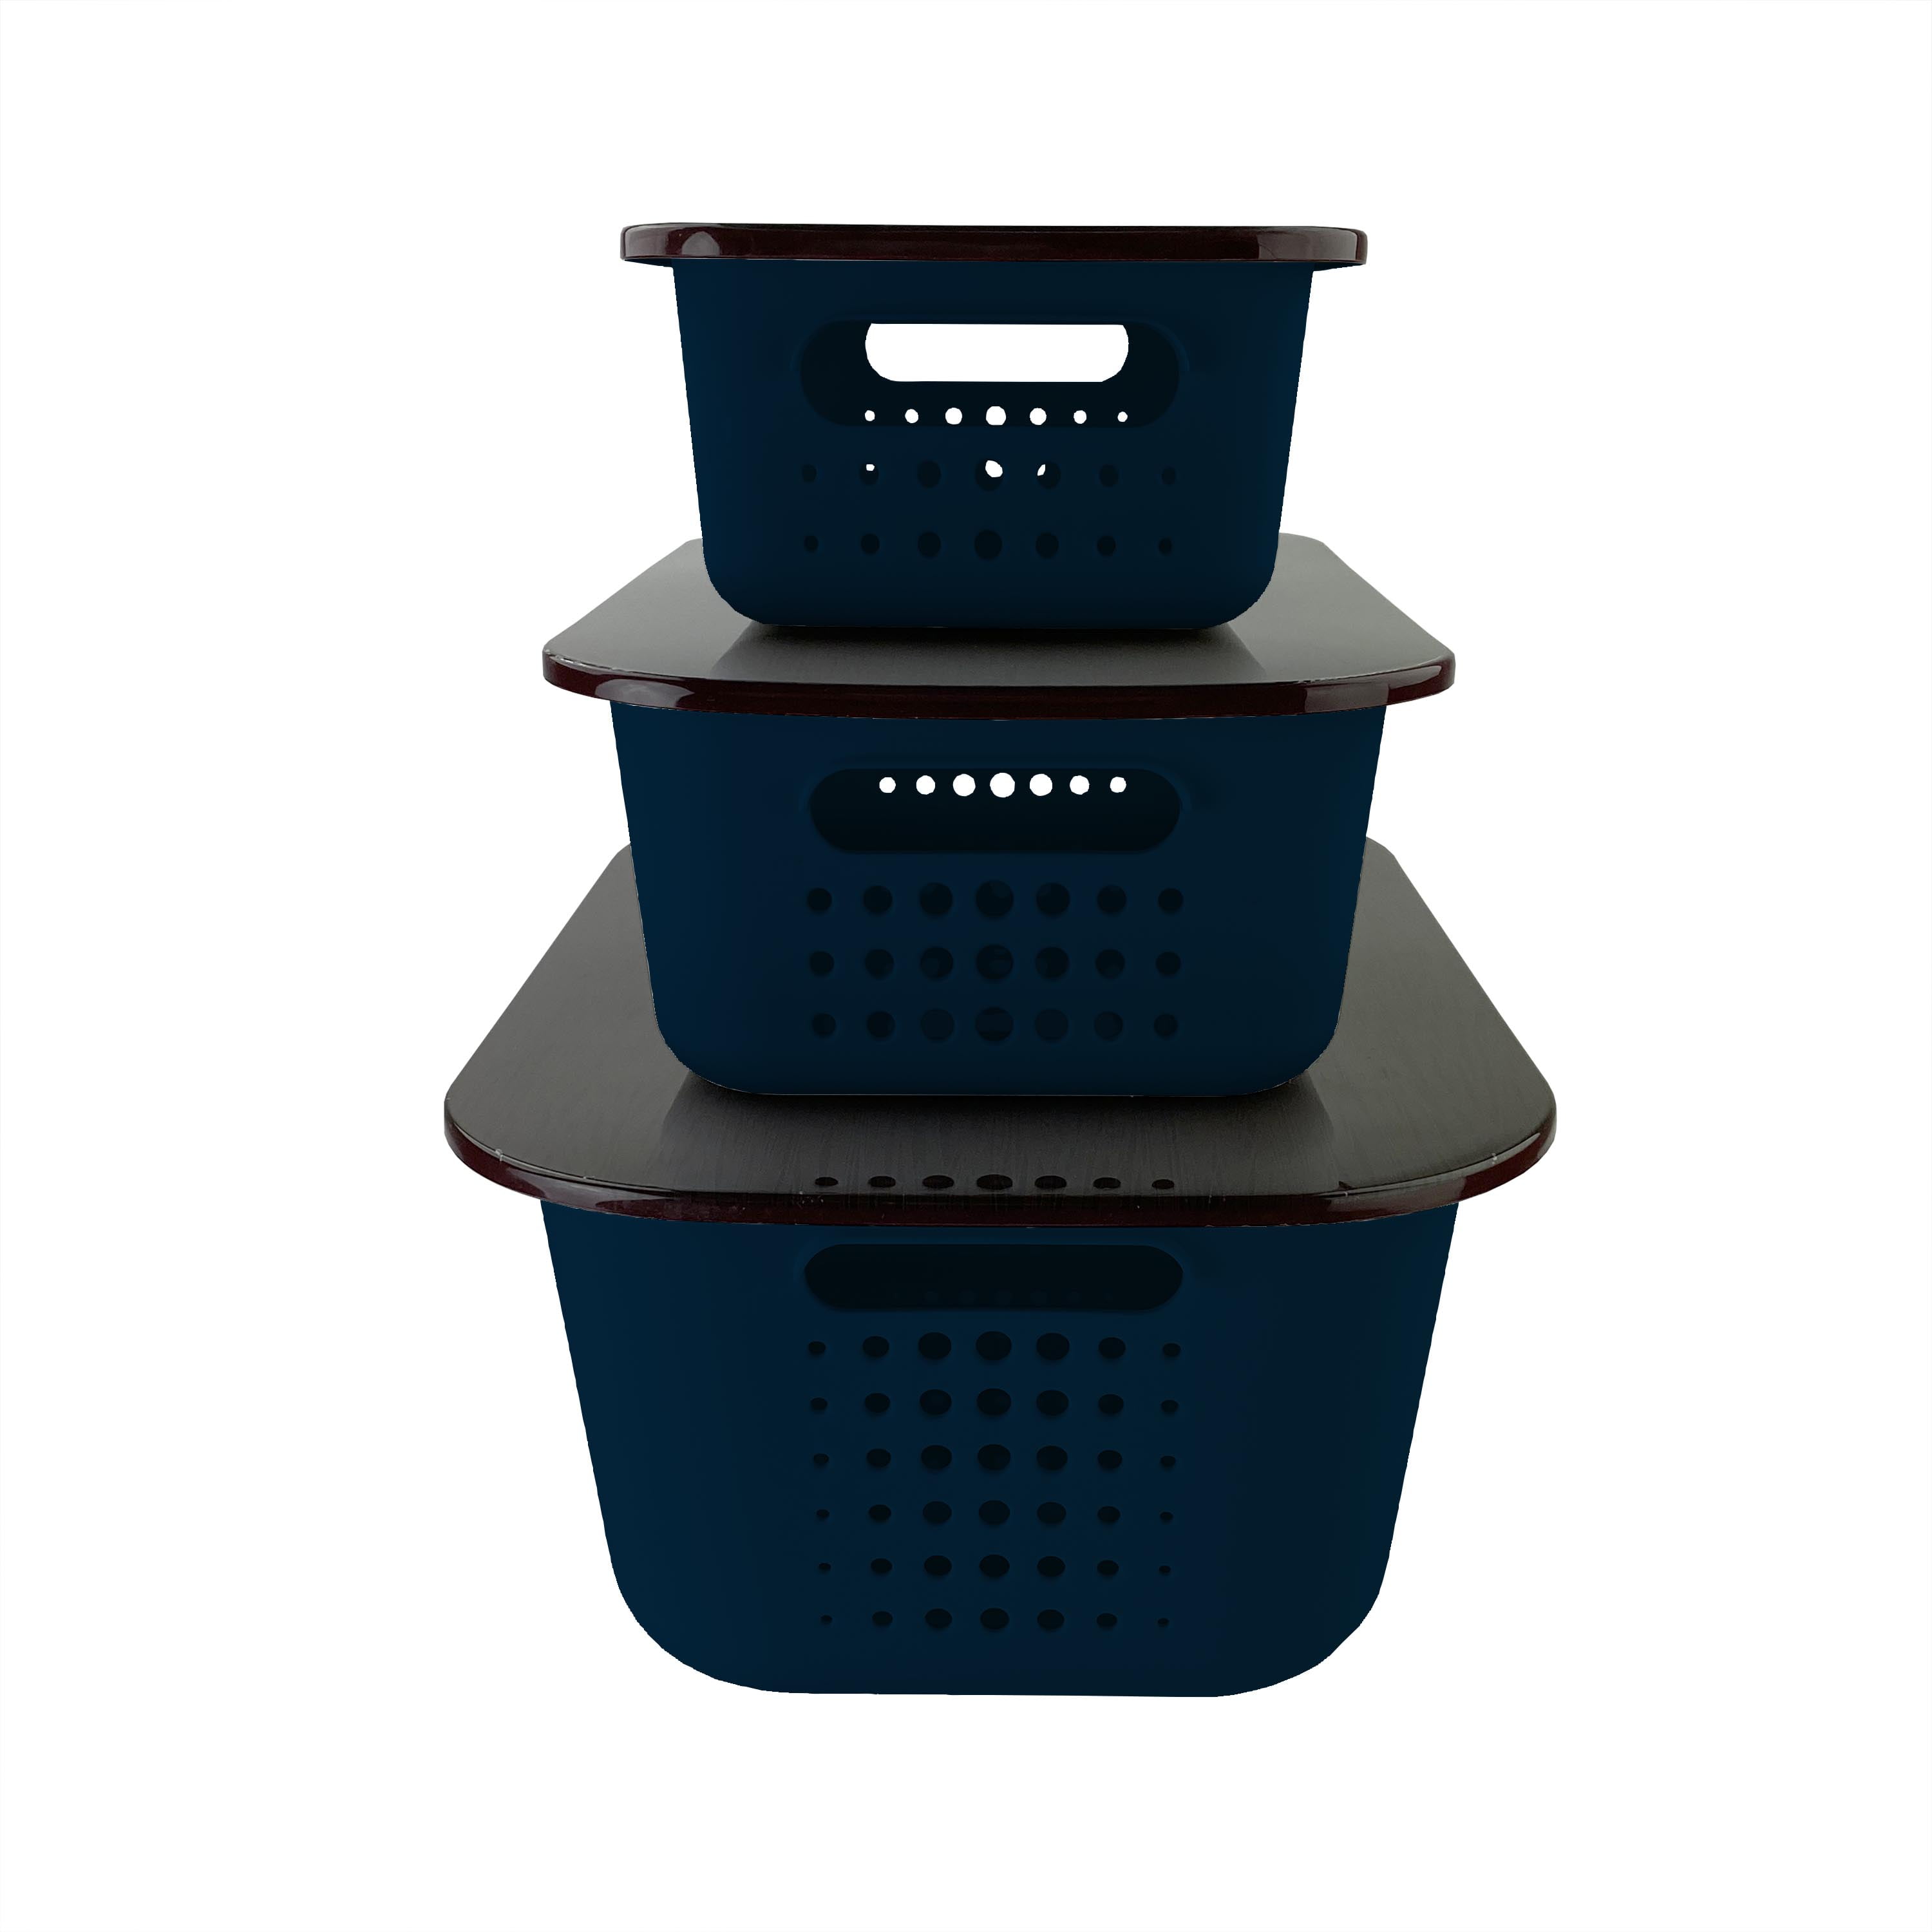 iPack 3-Piece Plastic Storage Set Containers with Lids - Navy/Brown